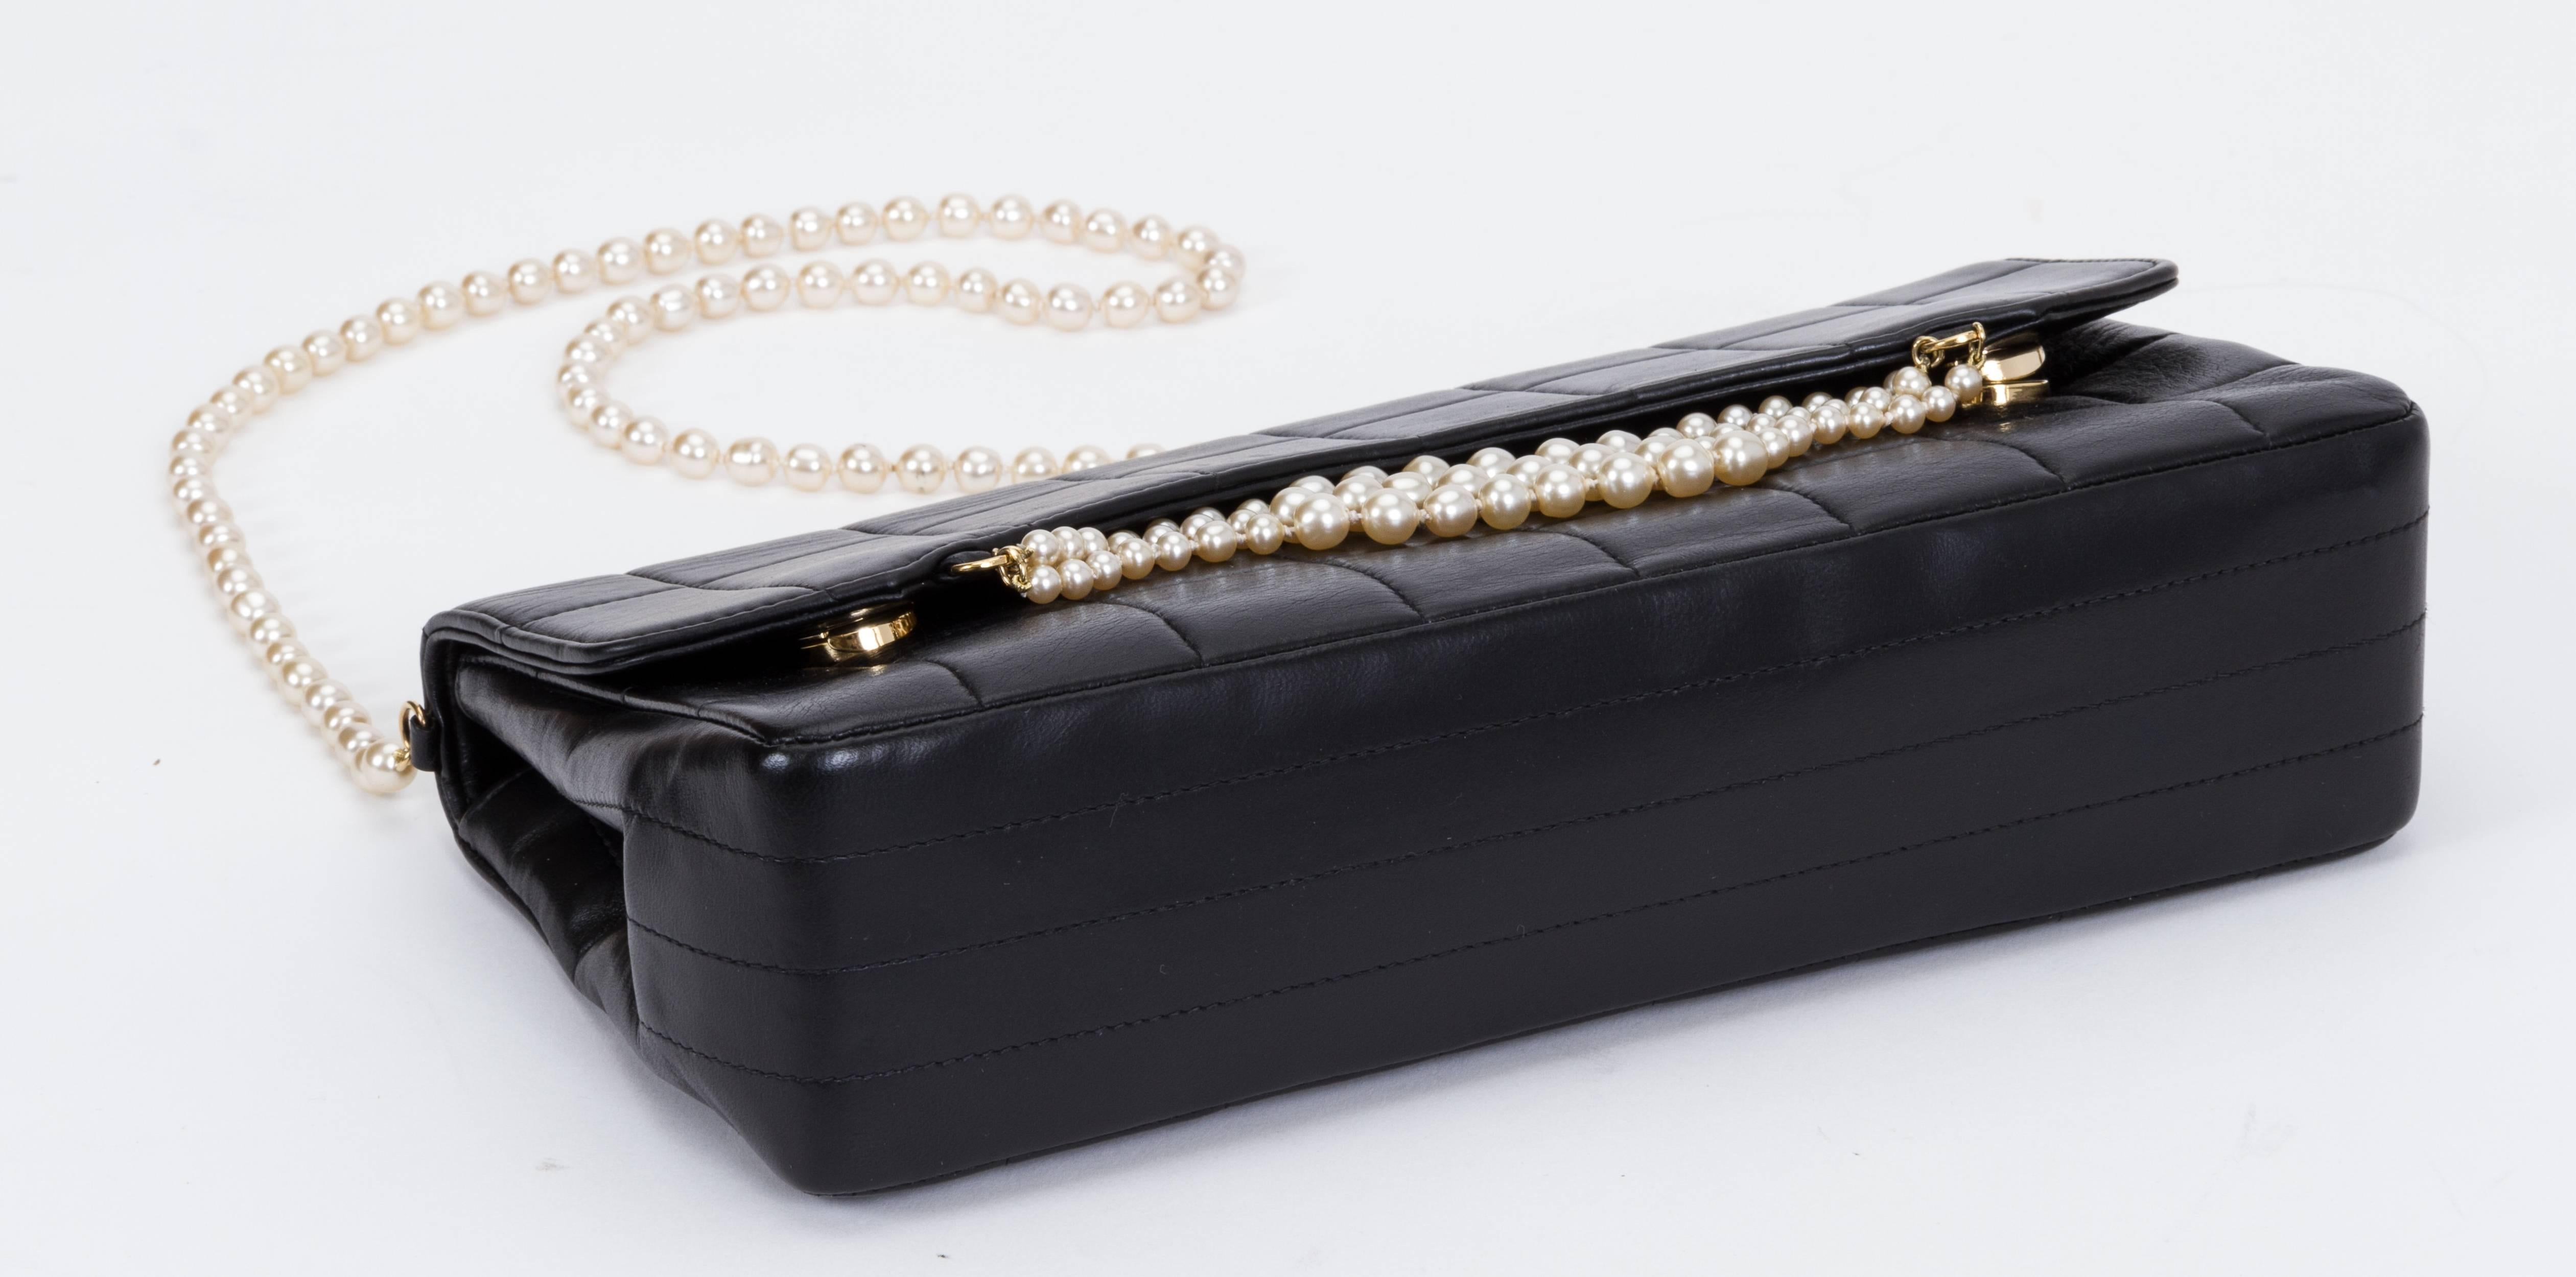 Women's Chanel Black Evening Bag With Pearls